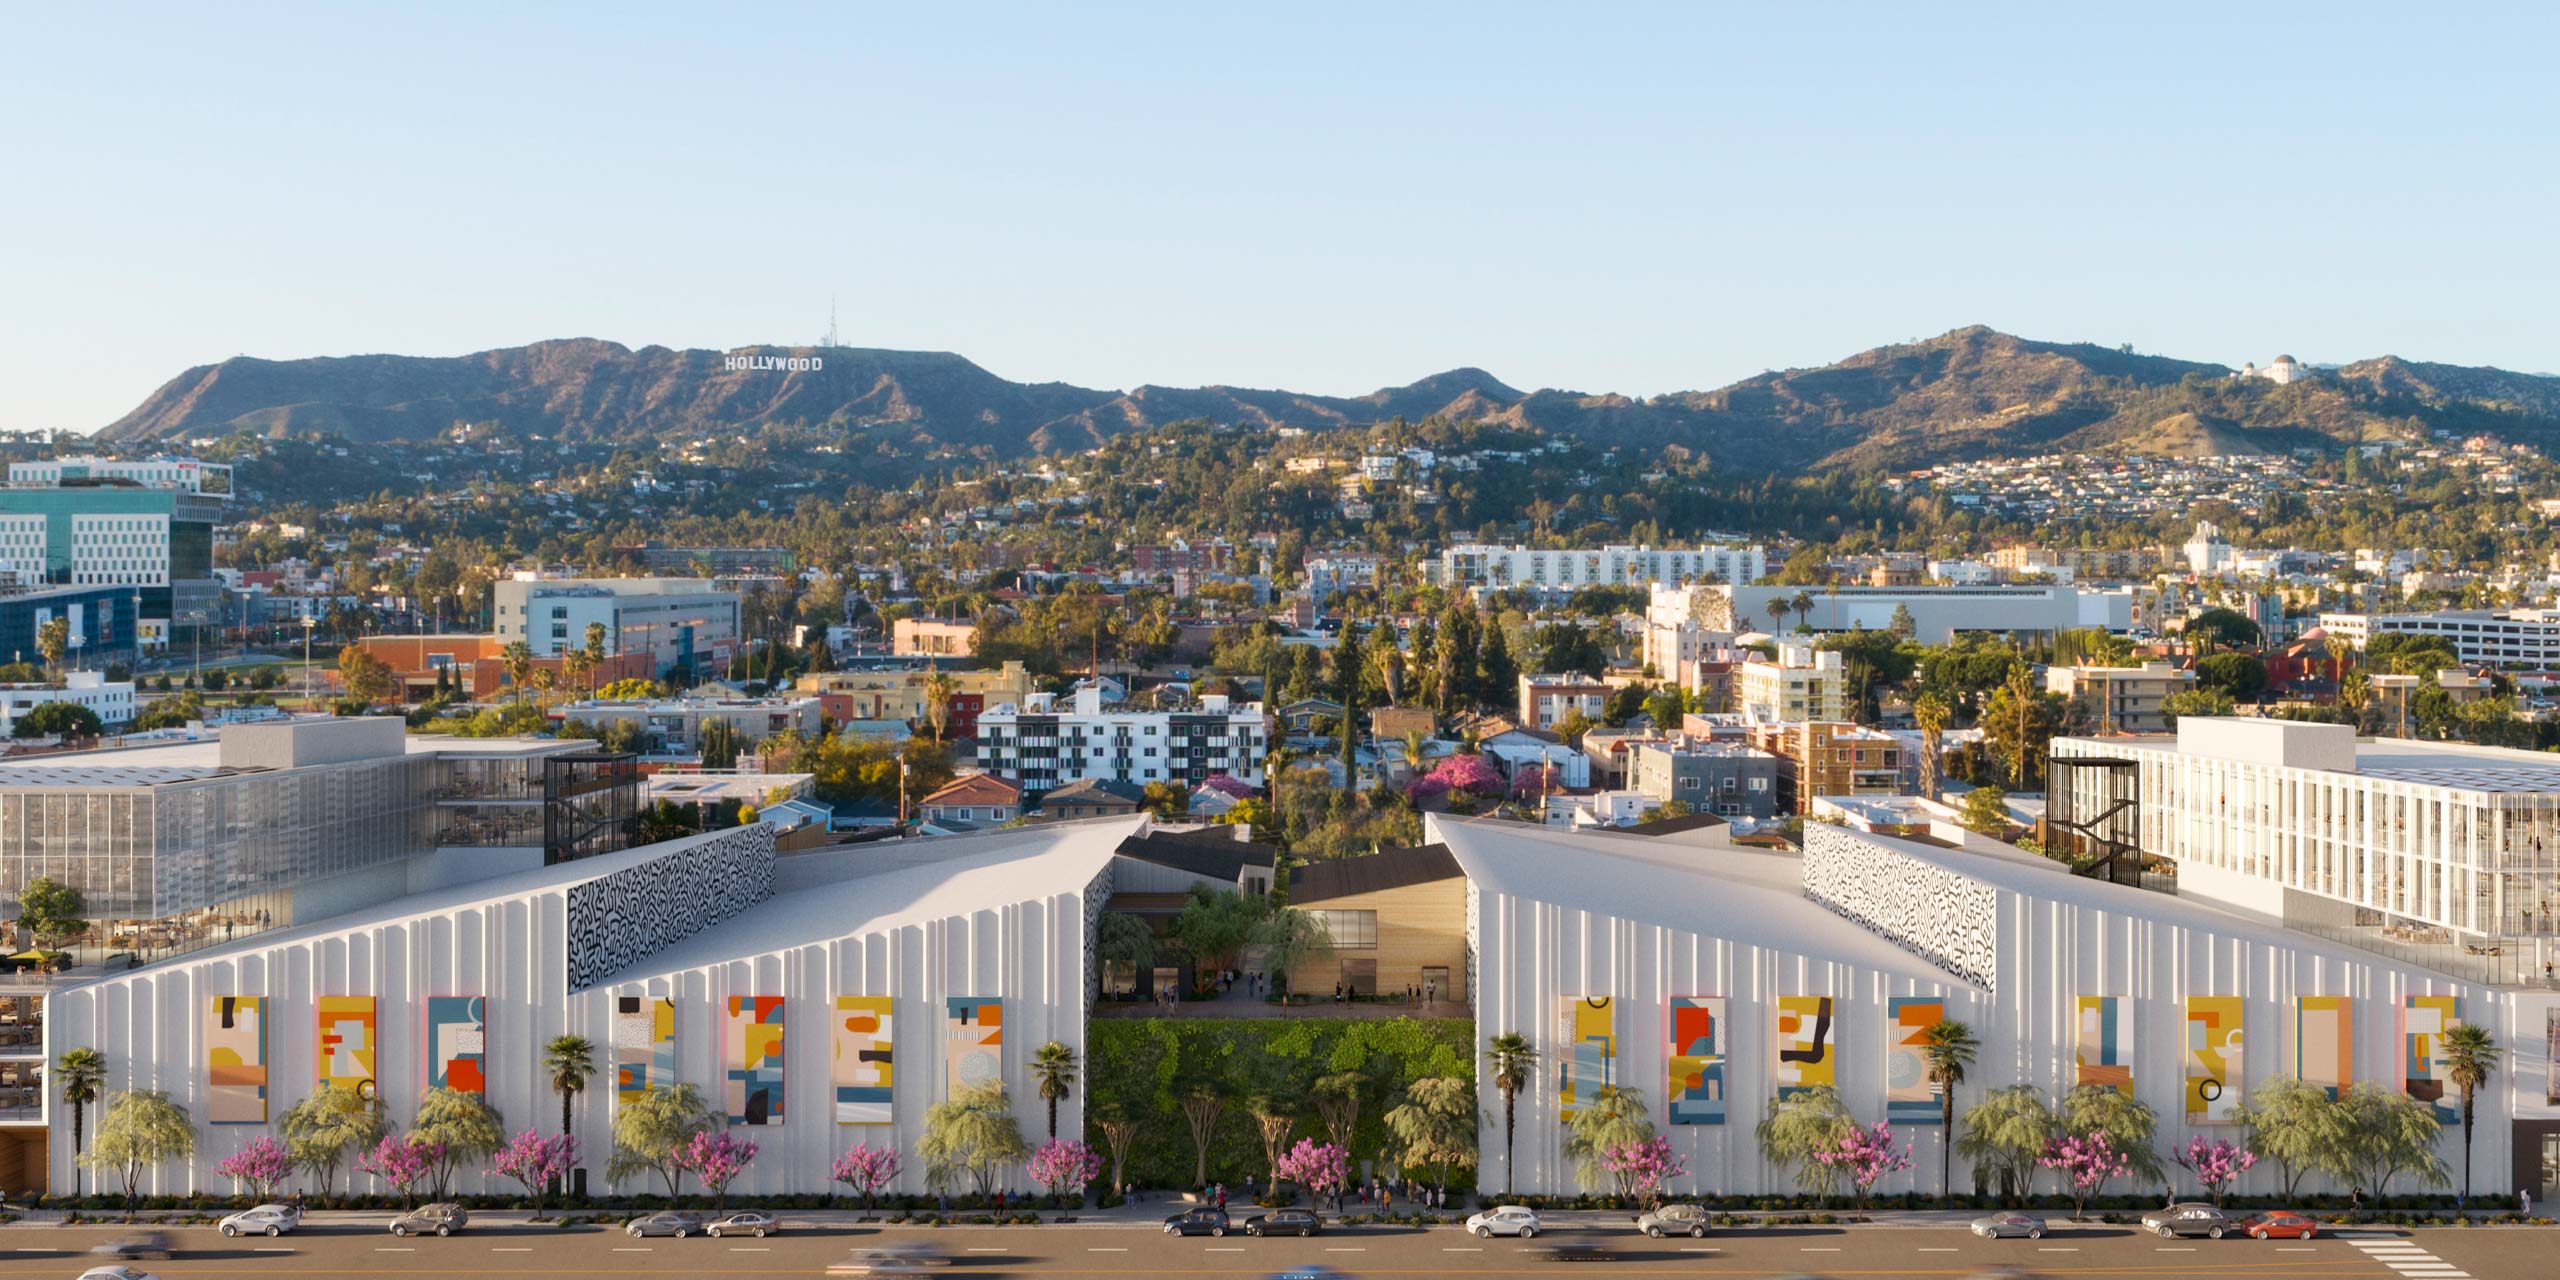 Echelon Studios rendering of the exterior facade with Hollywood hills backdrop